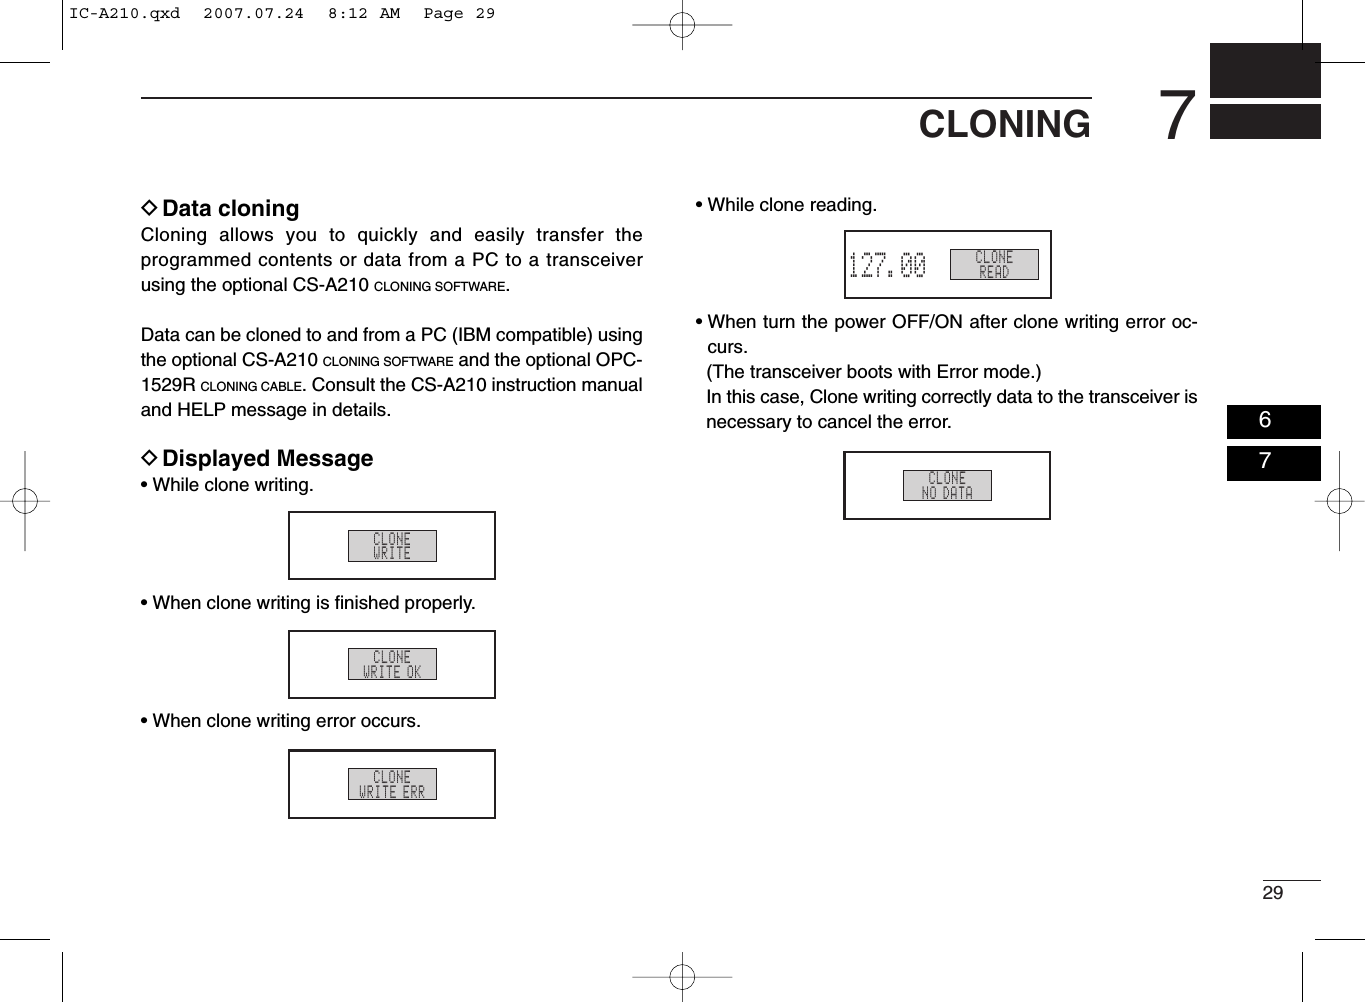 297CLONINGDData cloning Cloning allows you to quickly and easily transfer theprogrammed contents or data from a PC to a transceiverusing the optional CS-A210 CLONING SOFTWARE.Data can be cloned to and from a PC (IBM compatible) usingthe optional CS-A210 CLONING SOFTWARE and the optional OPC-1529R CLONING CABLE. Consult the CS-A210 instruction manualand HELP message in details.DDisplayed Message• While clone writing.• When clone writing is ﬁnished properly.• When clone writing error occurs.• While clone reading.• When turn the power OFF/ON after clone writing error oc-curs.(The transceiver boots with Error mode.)In this case, Clone writing correctly data to the transceiver isnecessary to cancel the error.CLONEWRITECLONEWRITE OKCLONEWRITE ERRCLONEREAD127.00RX MEMORYCLONENO DATA0607IC-A210.qxd  2007.07.24  8:12 AM  Page 29